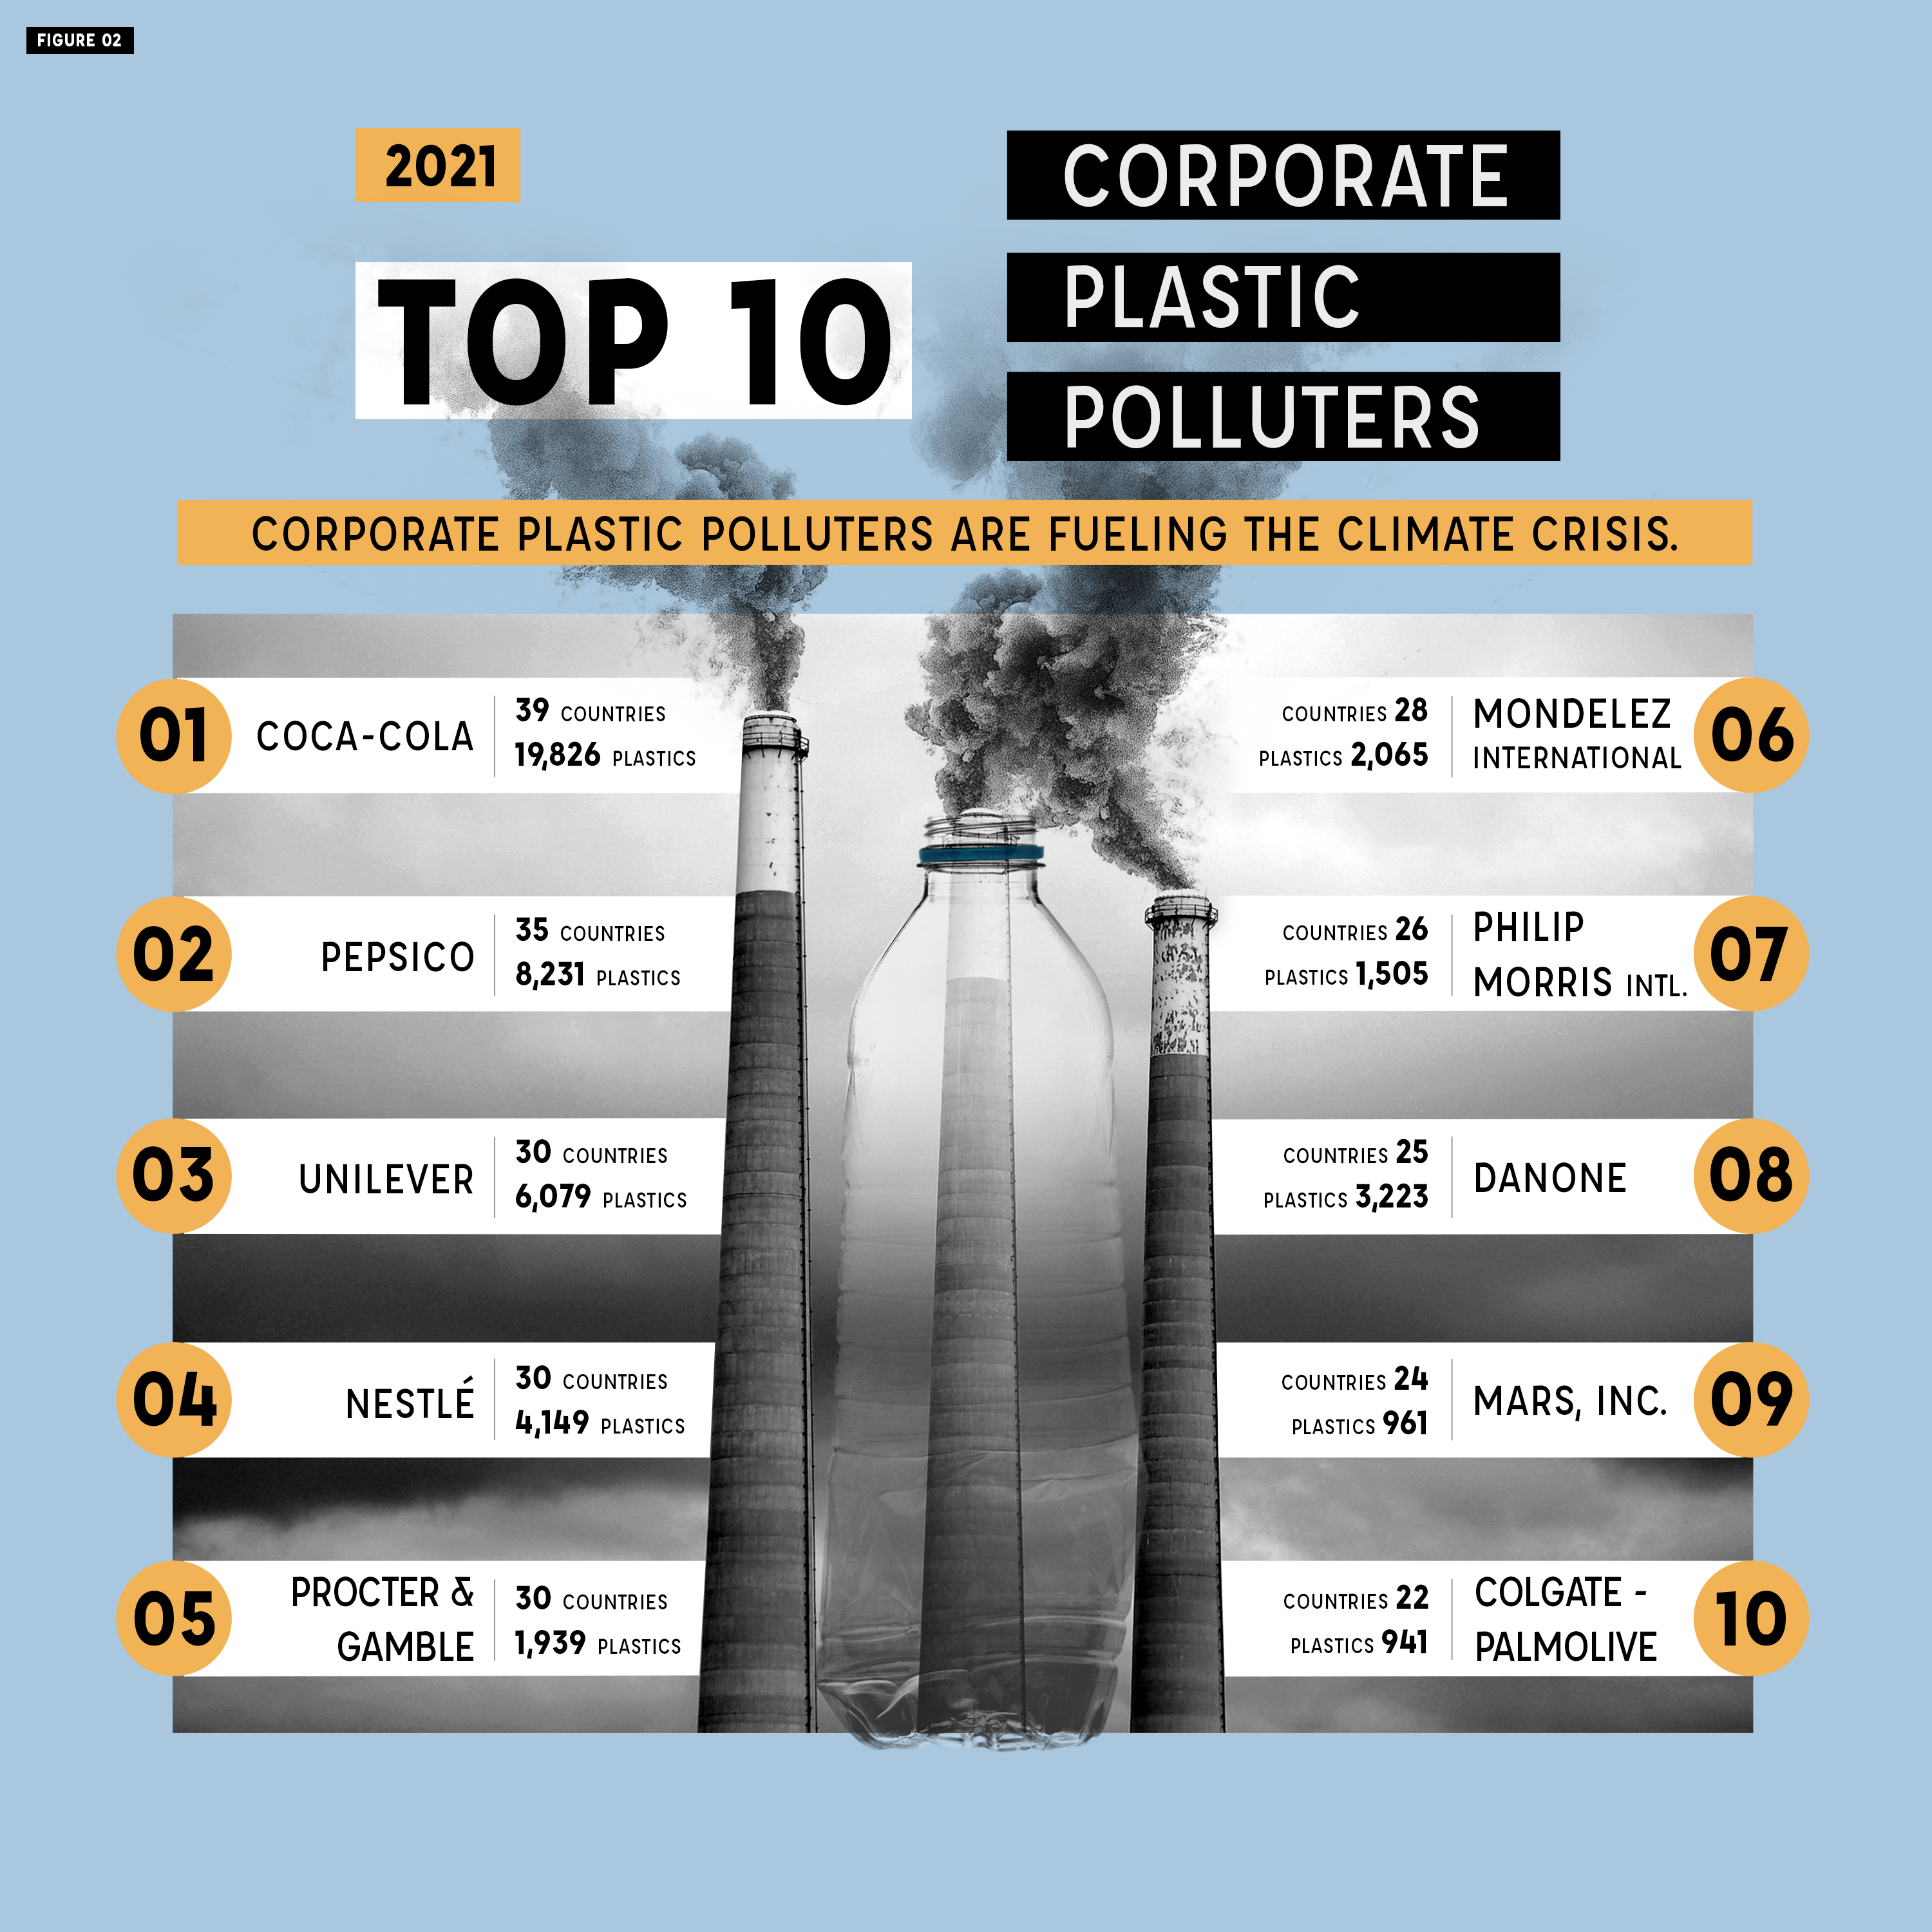 Top 10 corporate plastic polluters - Brand Audit 2021